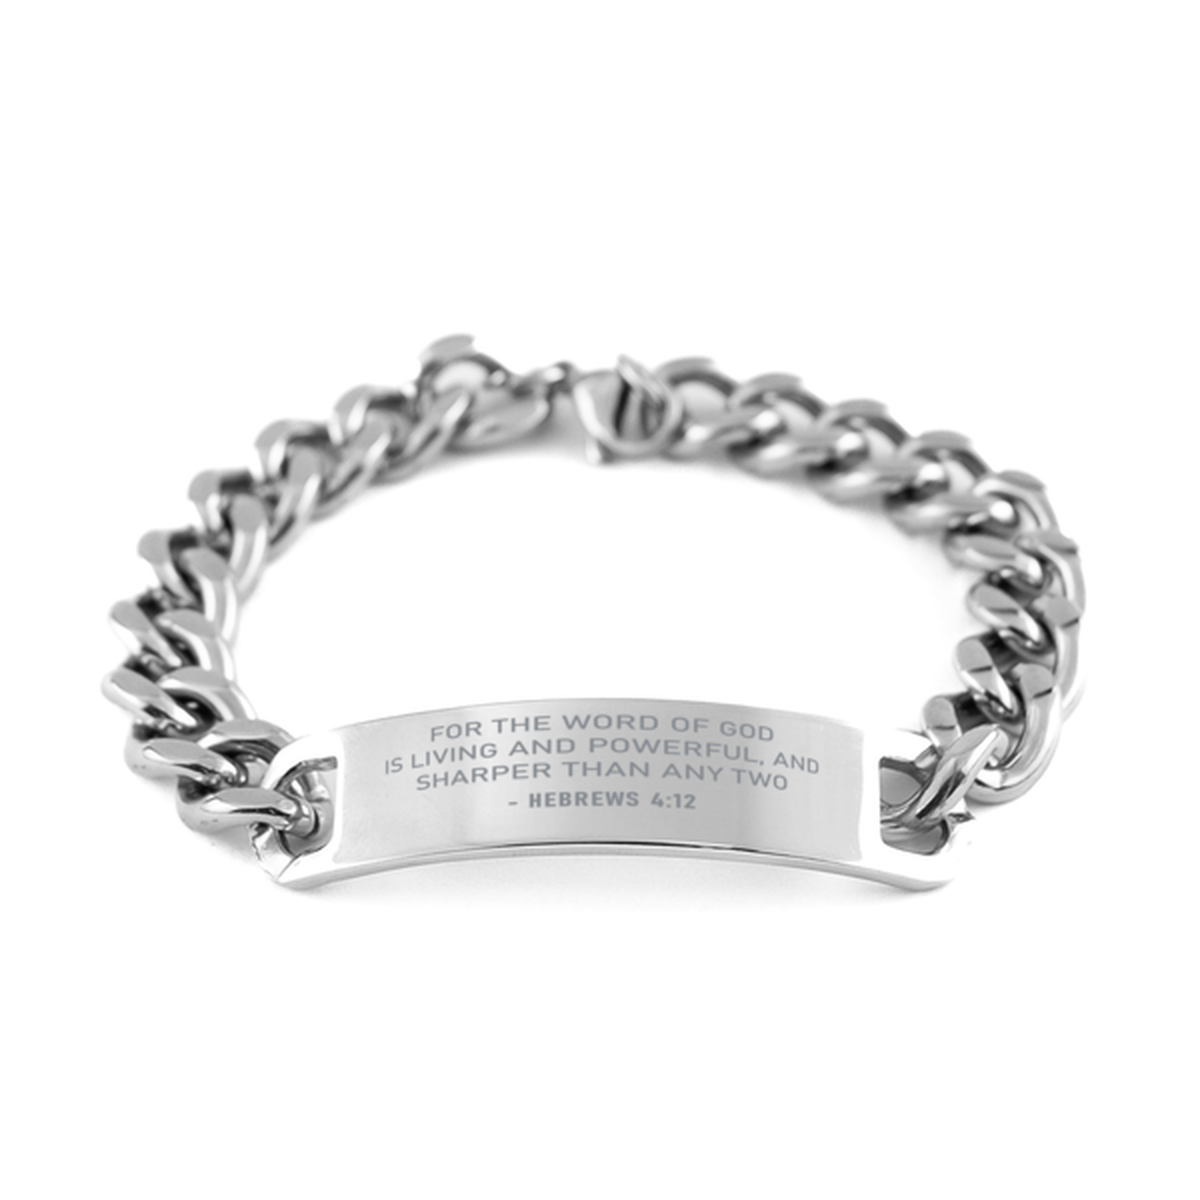 Bible Verse Chain Stainless Steel Bracelet, Hebrews 4:12 For The Word Of God Is Living And Powerful, And, Inspirational Christian Gifts For Men Women